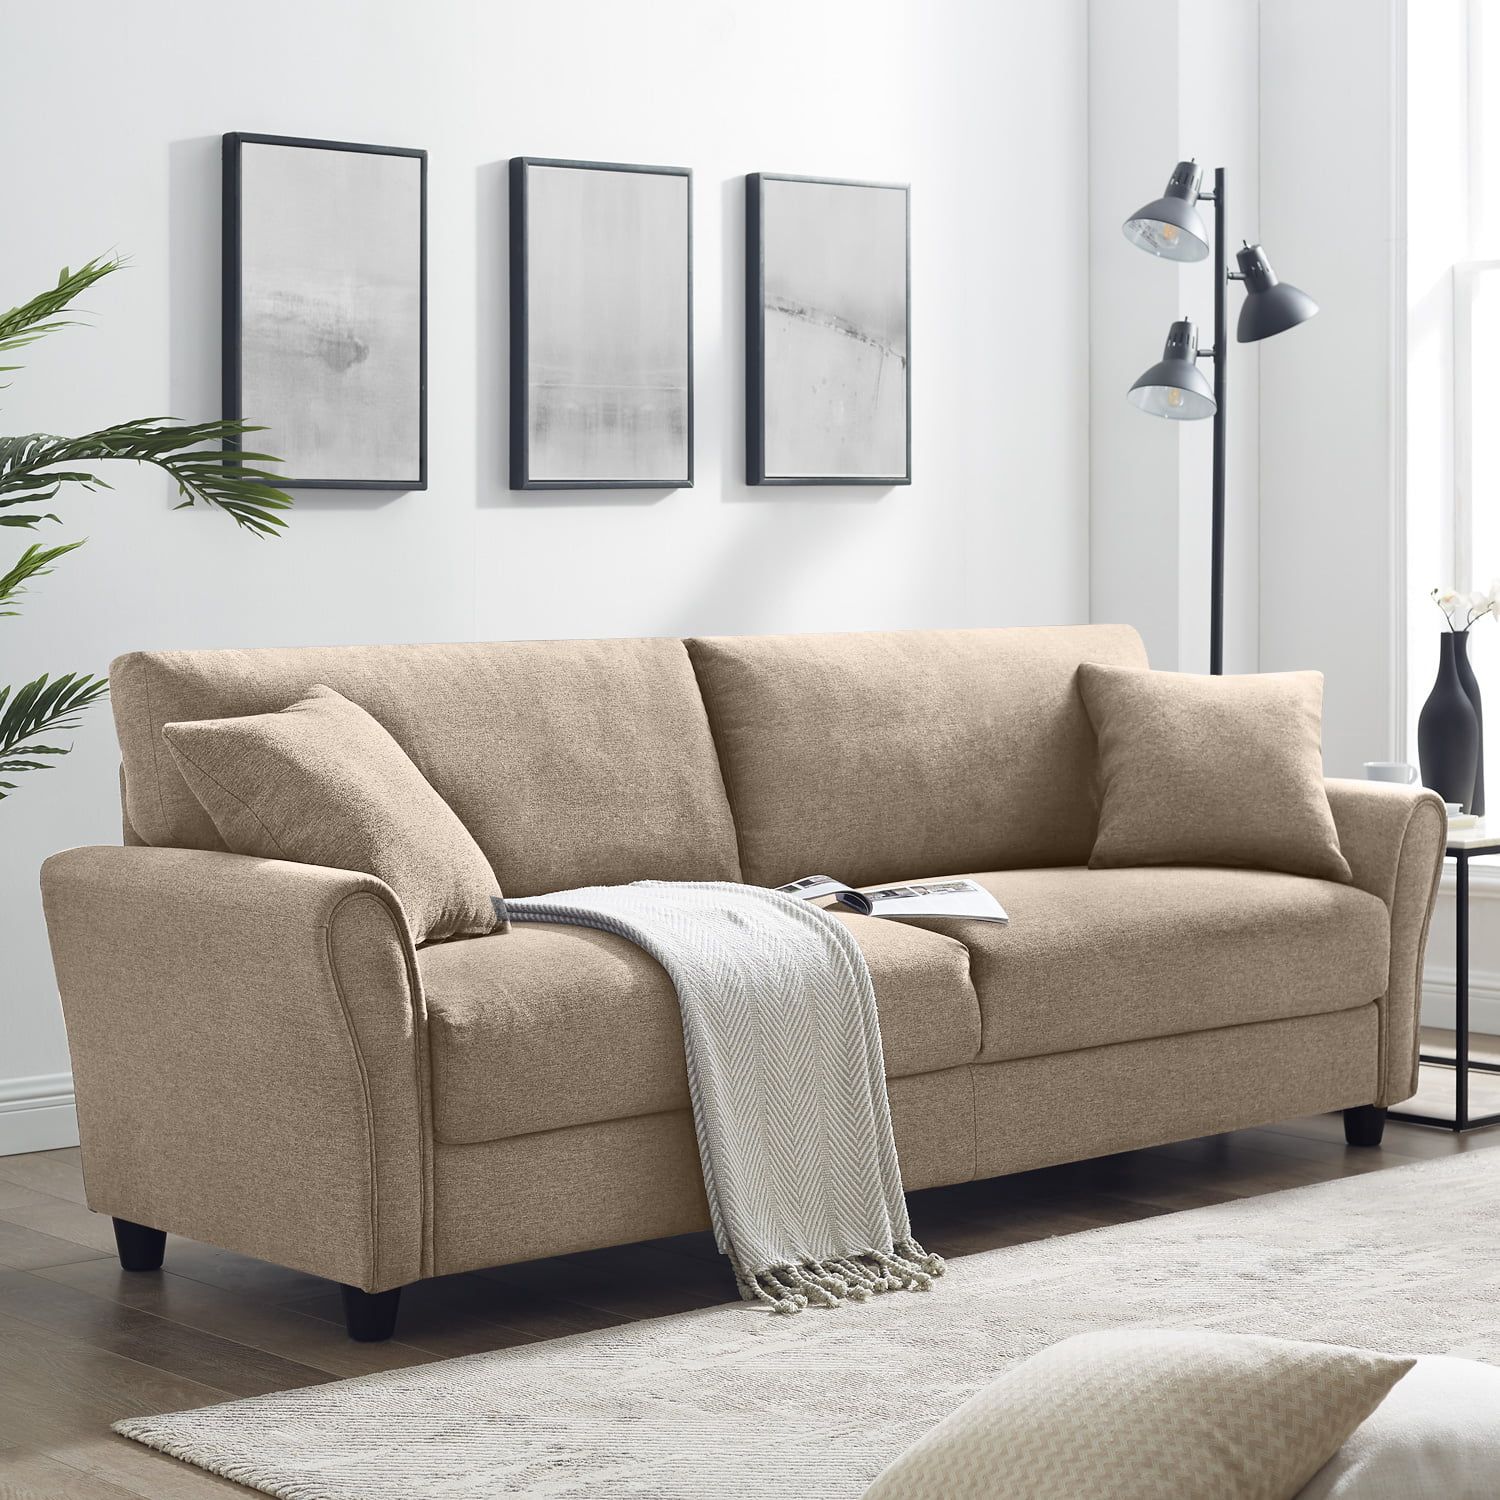 Upholstered 85 Inch Sofa Modern Linen Living Room Couch – Walmart Within Sofas For Living Rooms (View 11 of 20)